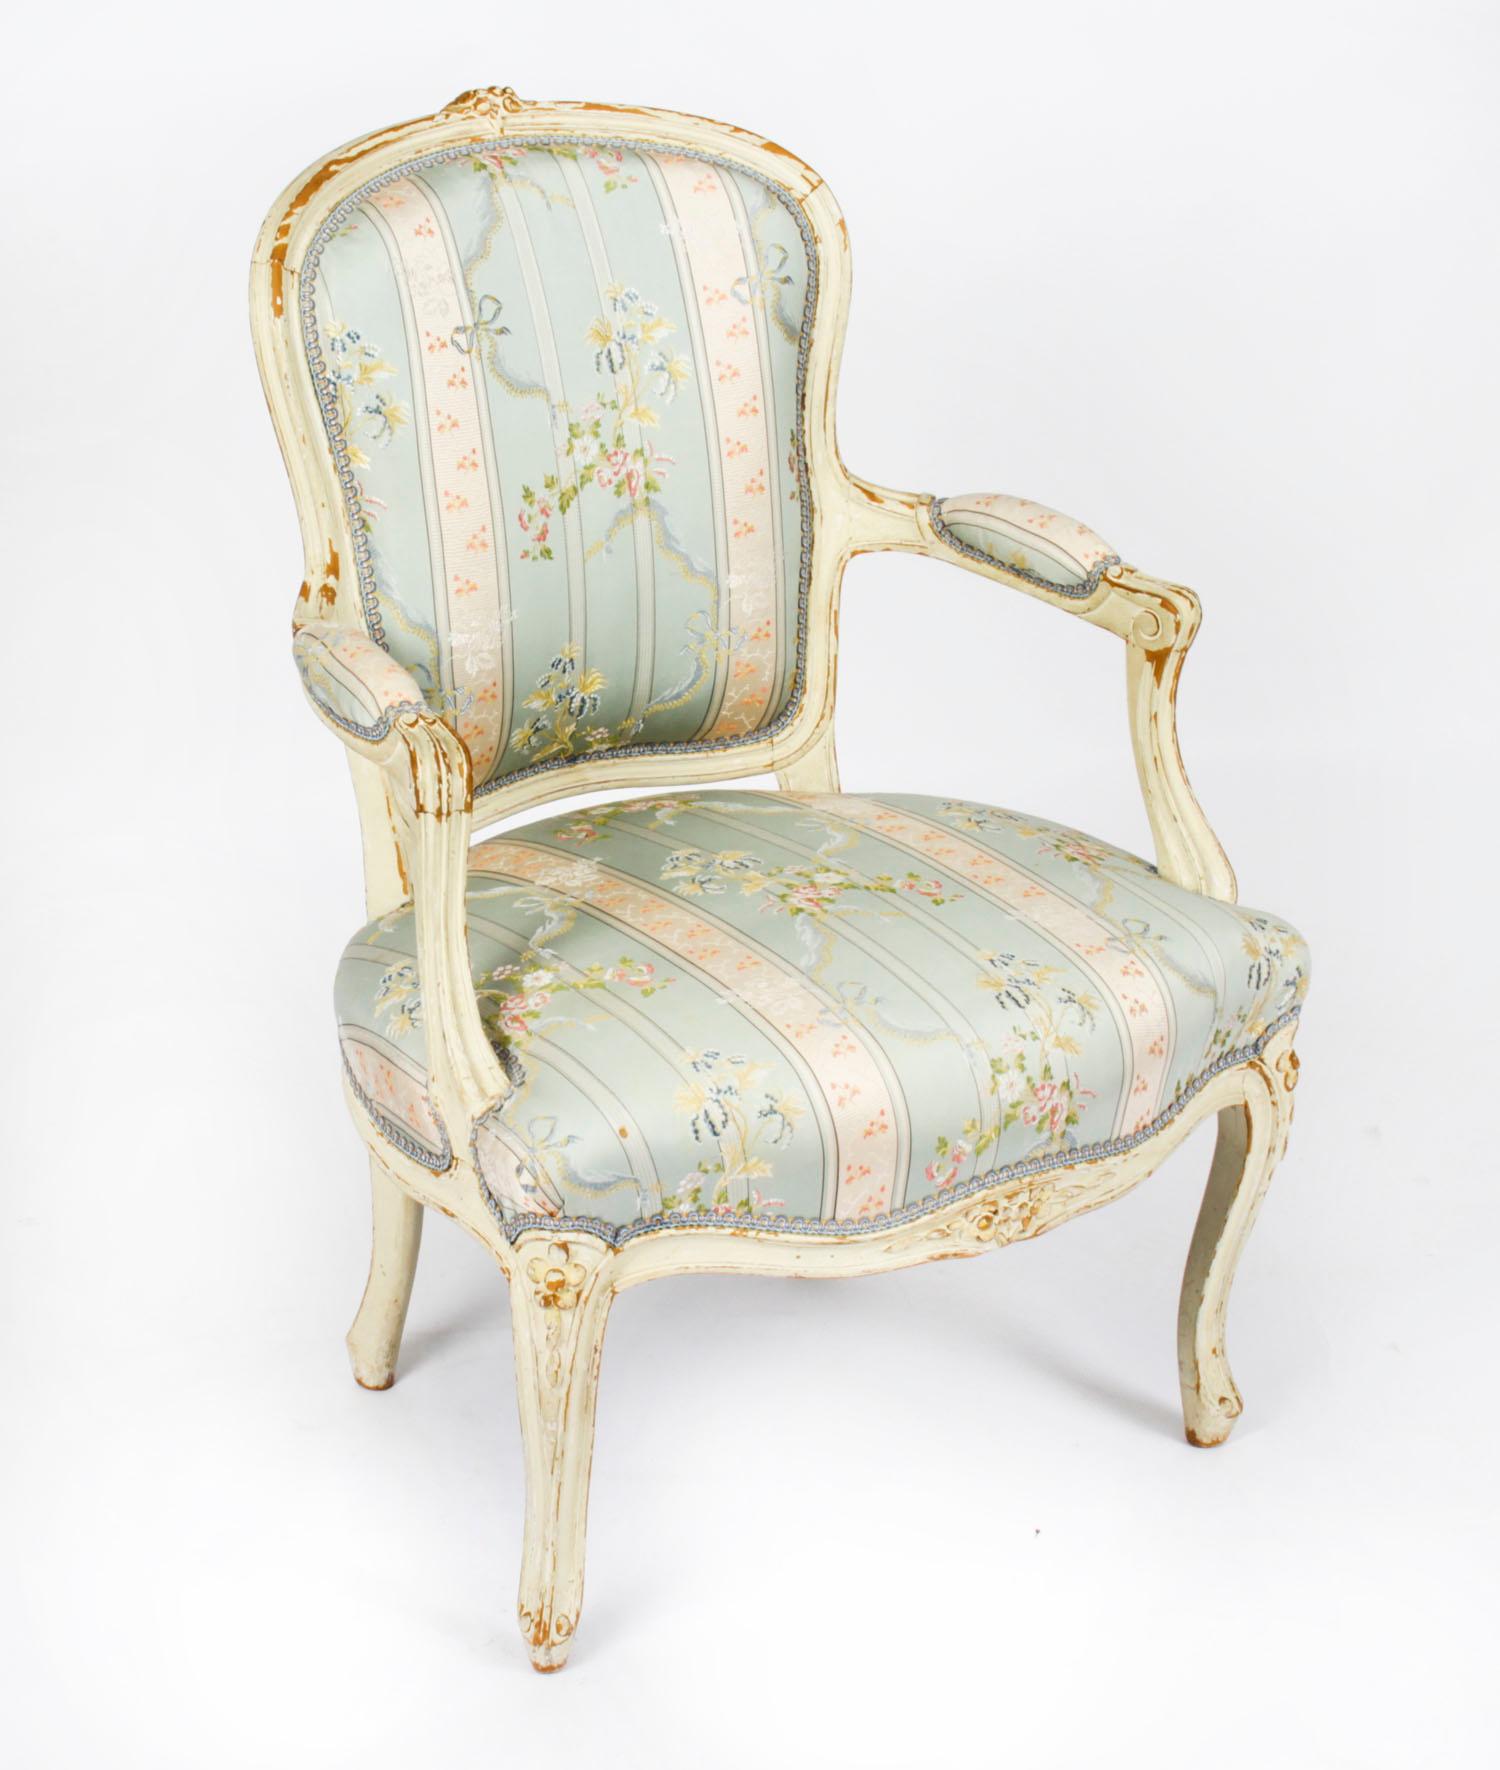 This is a beautiful antique pair of Louis Revival French shabby chic cream painted fauteuils, or open armchairs, late 19th century in date.
 
They each feature a flower carved crested toprail with acanthus clasped arm padded supports. They are